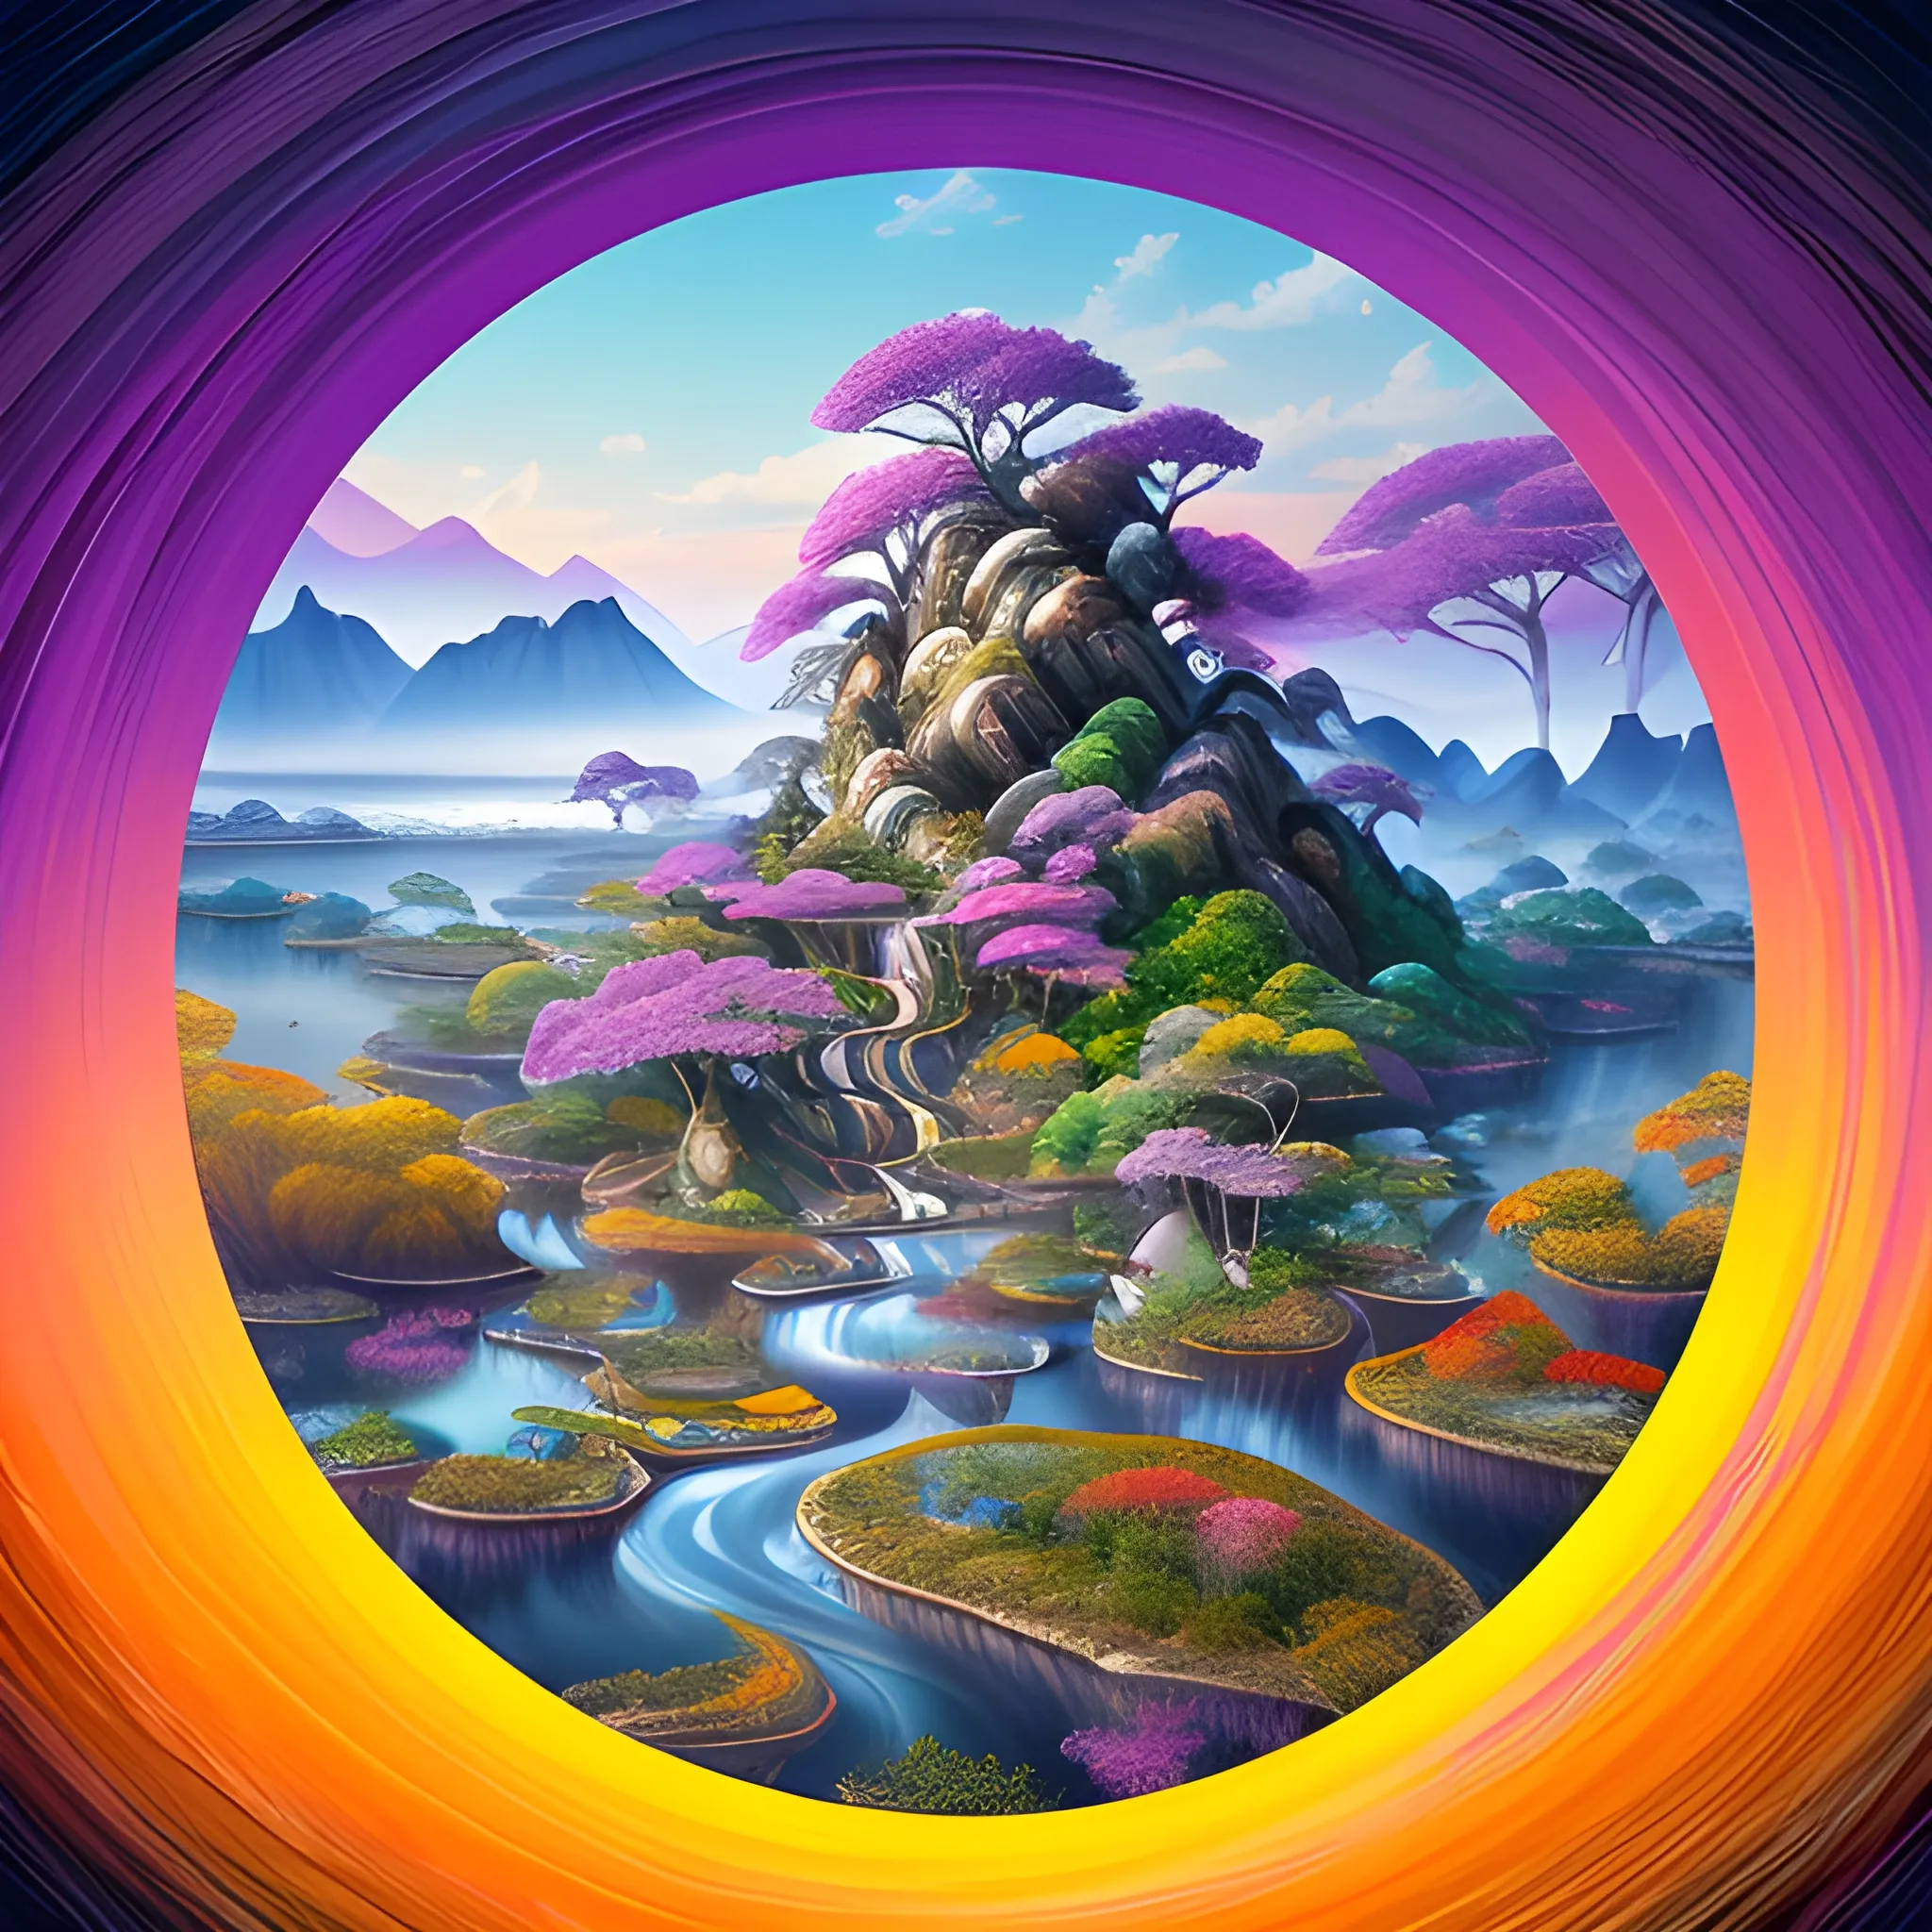 (by Ananta Mandal (and Andrew Biraj:0.5)), (in the style of nihonga), Style: Abstract, Medium: Digital illustration, Subject: A Guanshiyin Pusa in the middle of picture, An otherworldly landscape with floating islands, cascading waterfalls, and vibrant flora and fauna. Camera Angle: Overhead shot capturing the vastness and intricate details of the scene. The colors are saturated, and the lighting creates a warm and ethereal atmosphere. The painting is highly detailed, with every brushstroke capturing the complexity of the imaginary world., (high quality), (detailed), (masterpiece), (best quality), (highres), (extremely detailed), (8k), seed:792315689, 3D